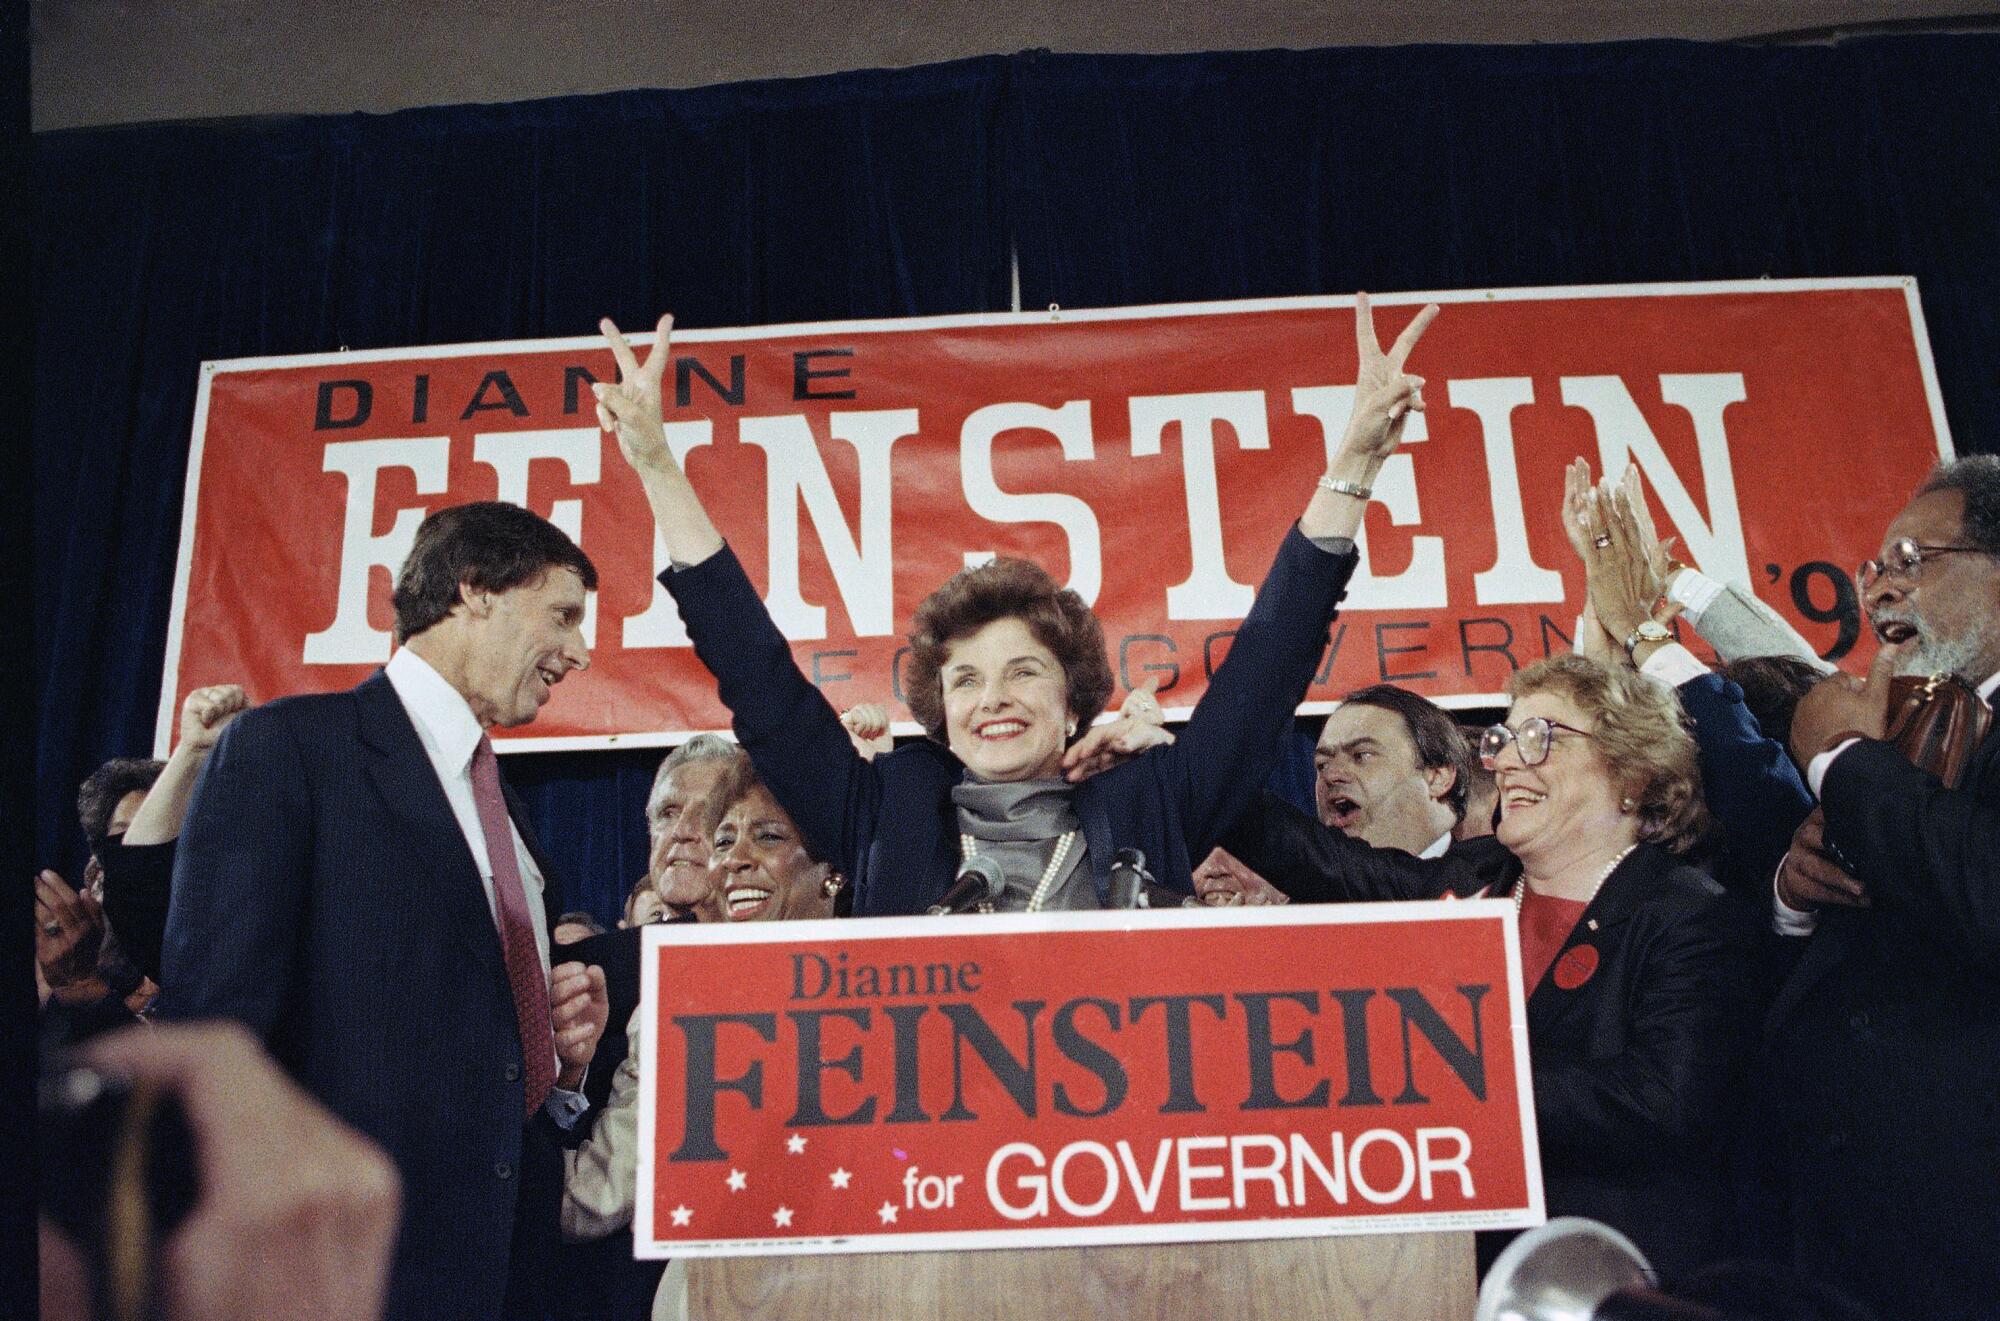 Democratic gubernatorial candidate Dianne Feinstein waves to supporters at the Fairmont Hotel 